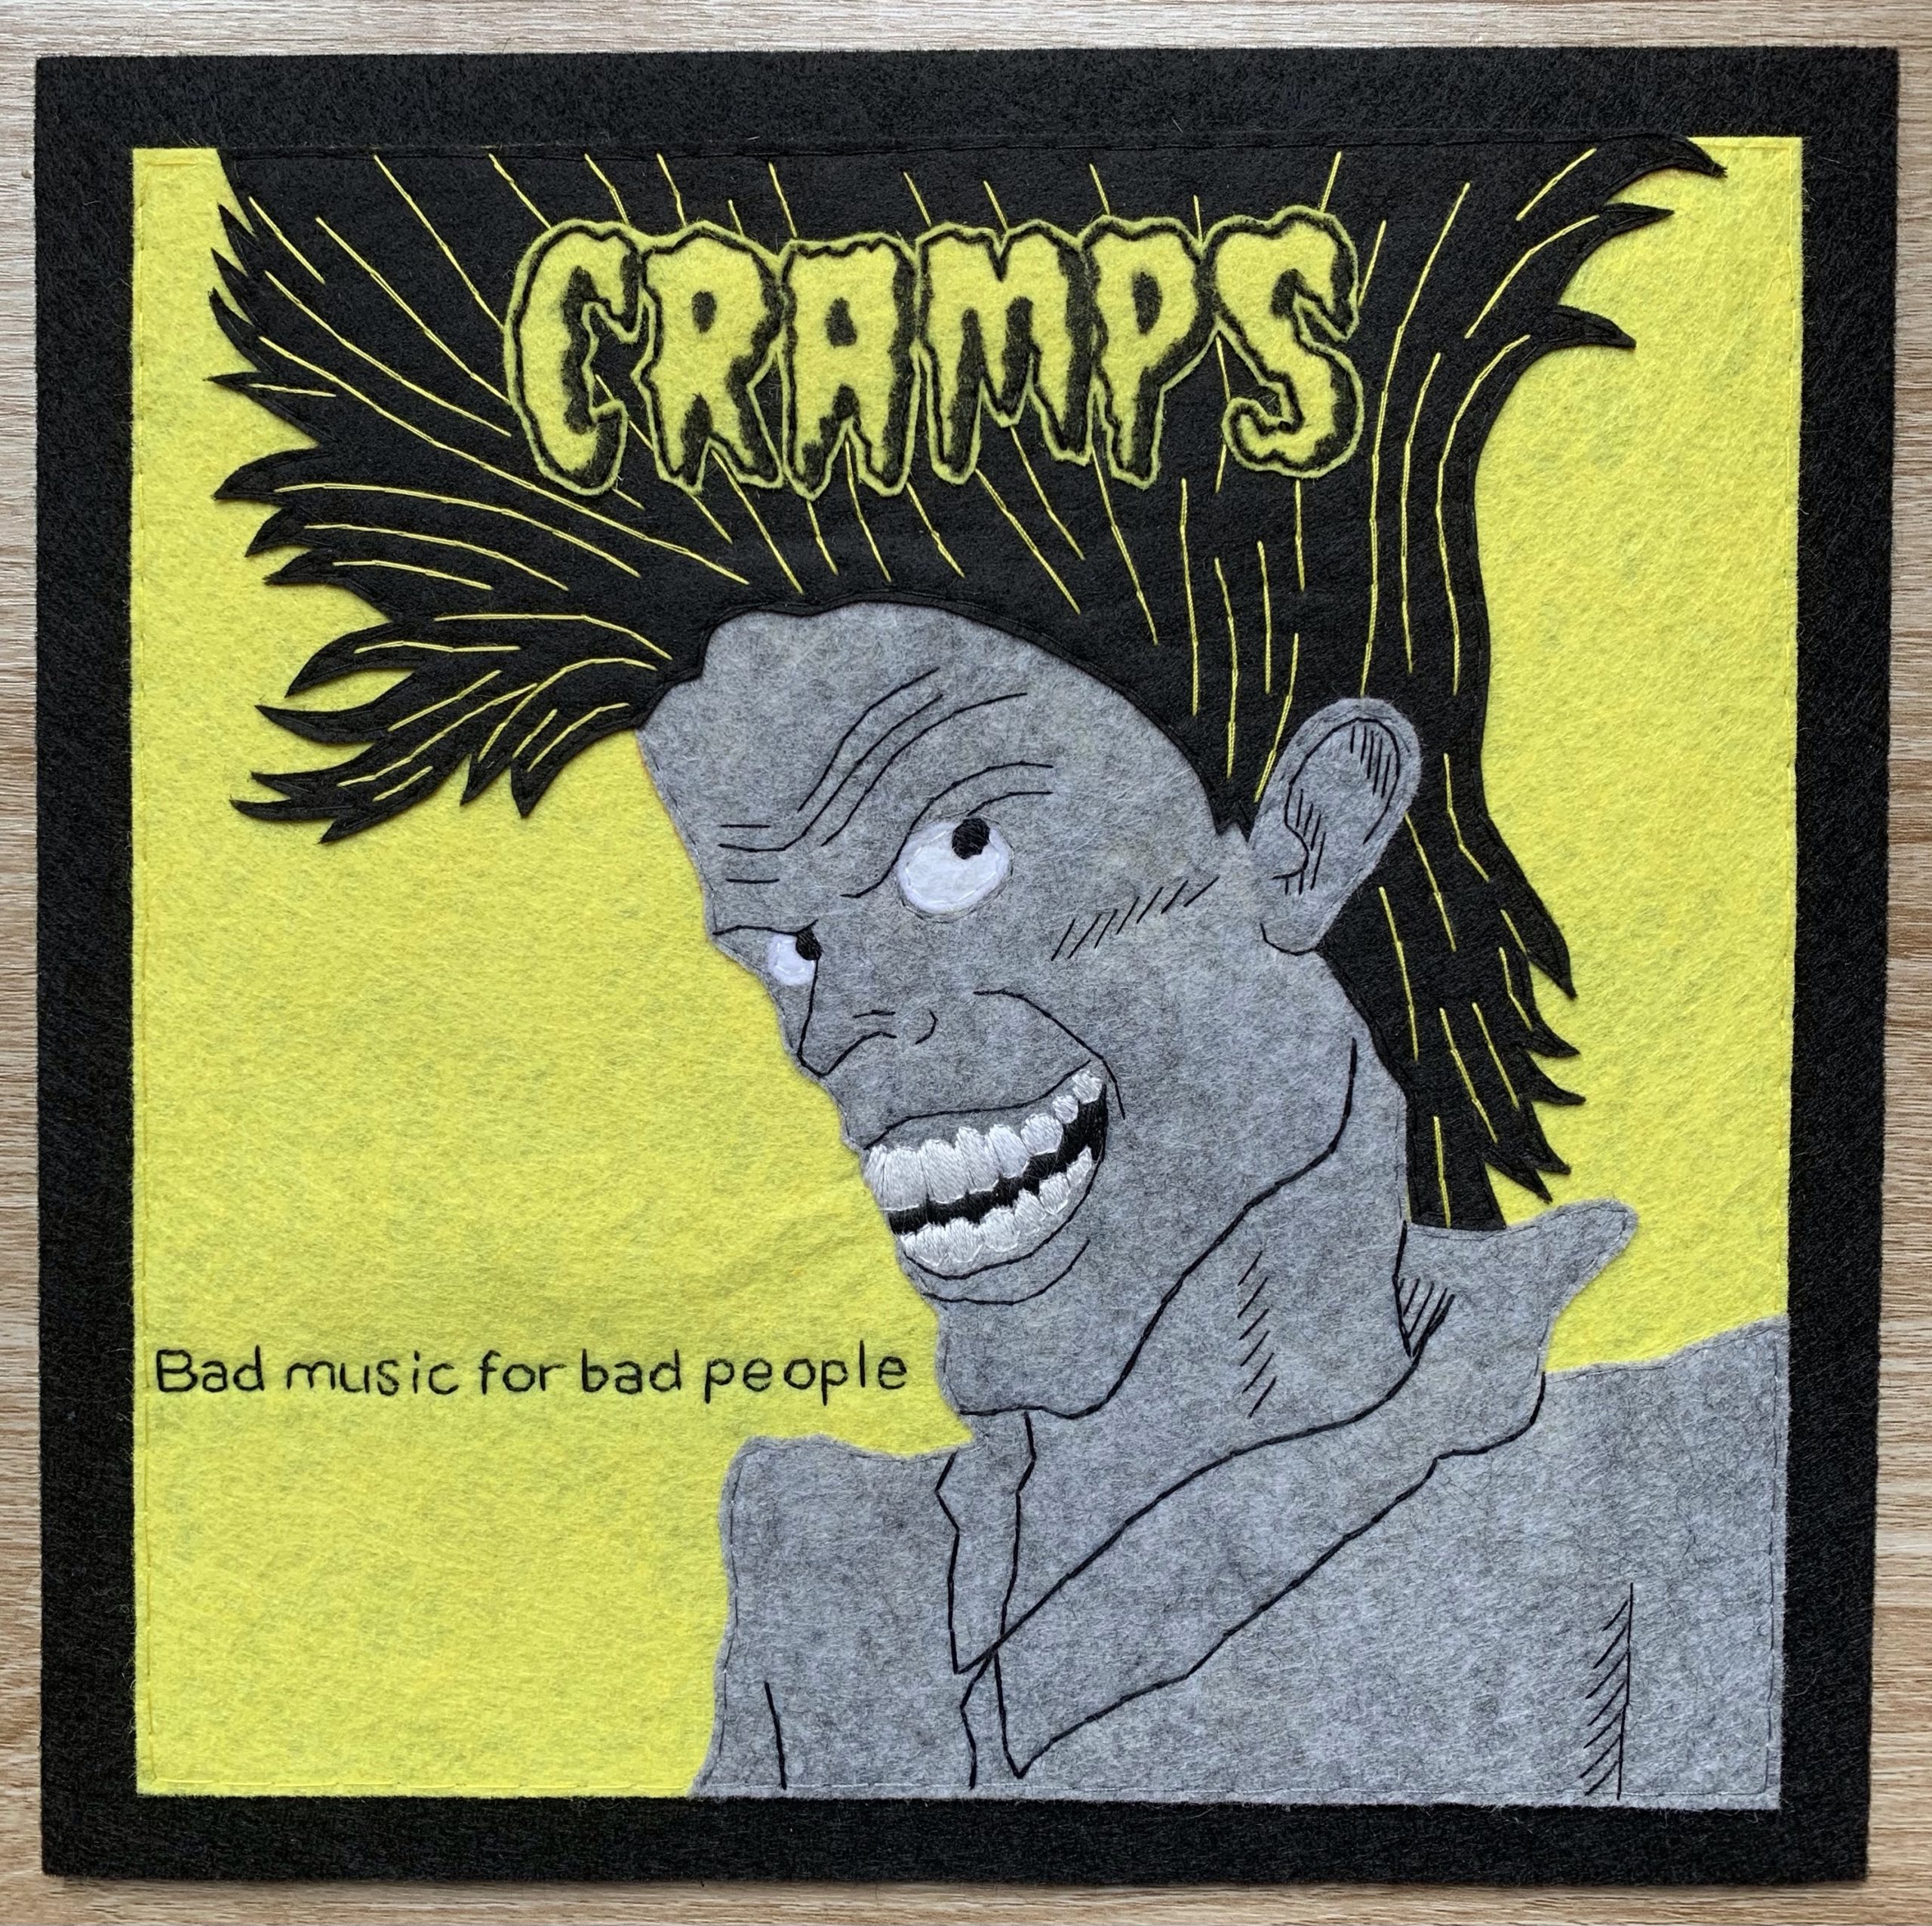 The Cramps – Bad Music For Bad People (1983)